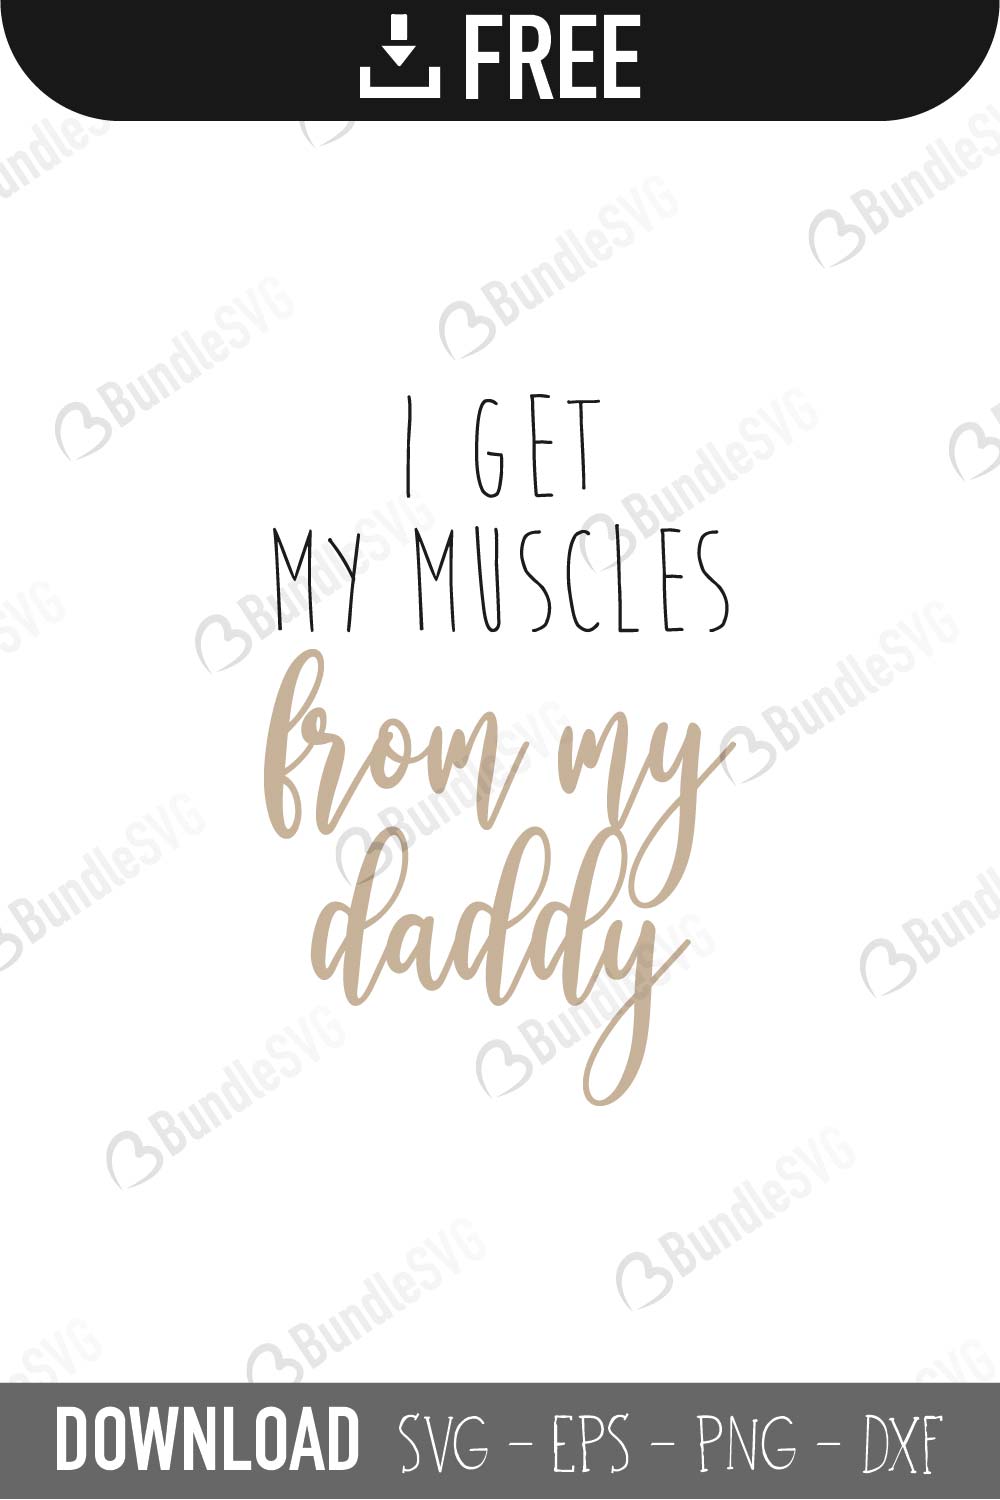 Download I Get My Muscles From My Daddy Svg Cut Files Bundlesvg